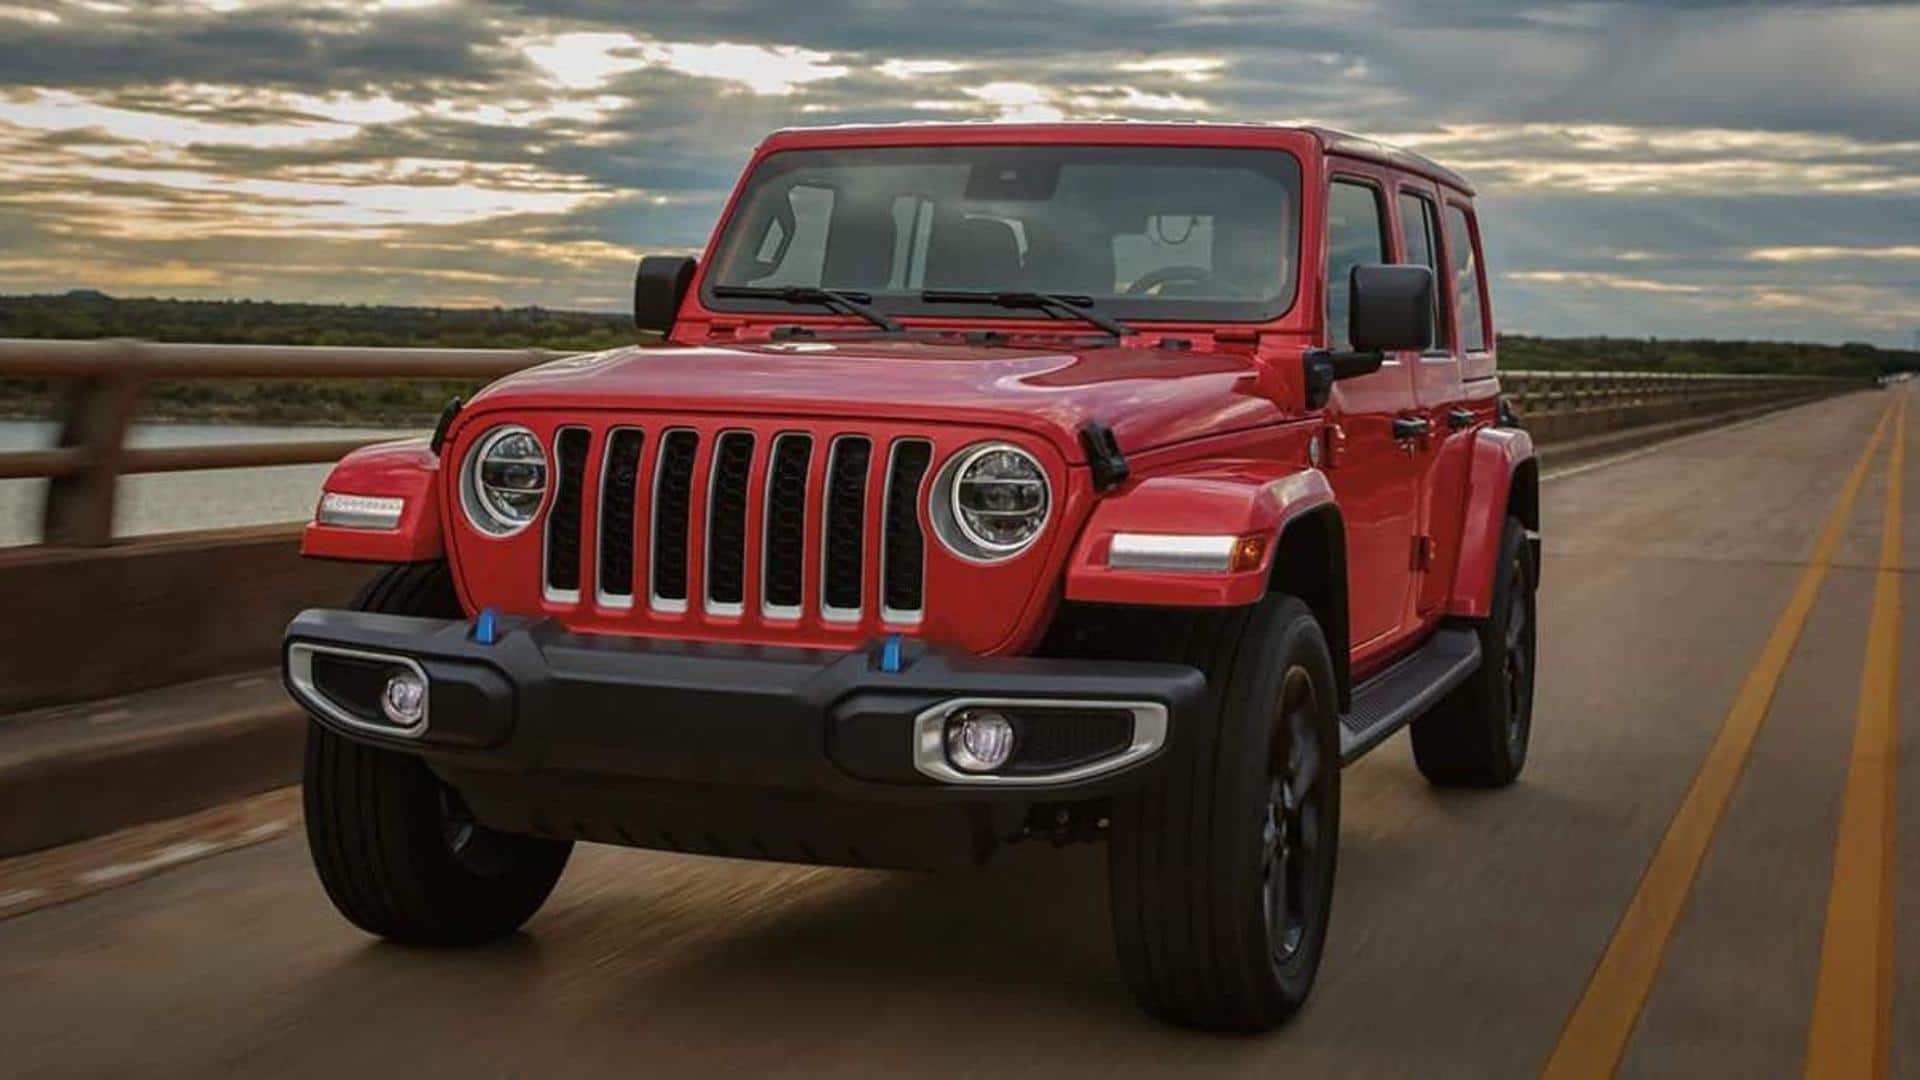 Jeep recalls nearly 58,000 Wrangler SUVs in US: Here's why